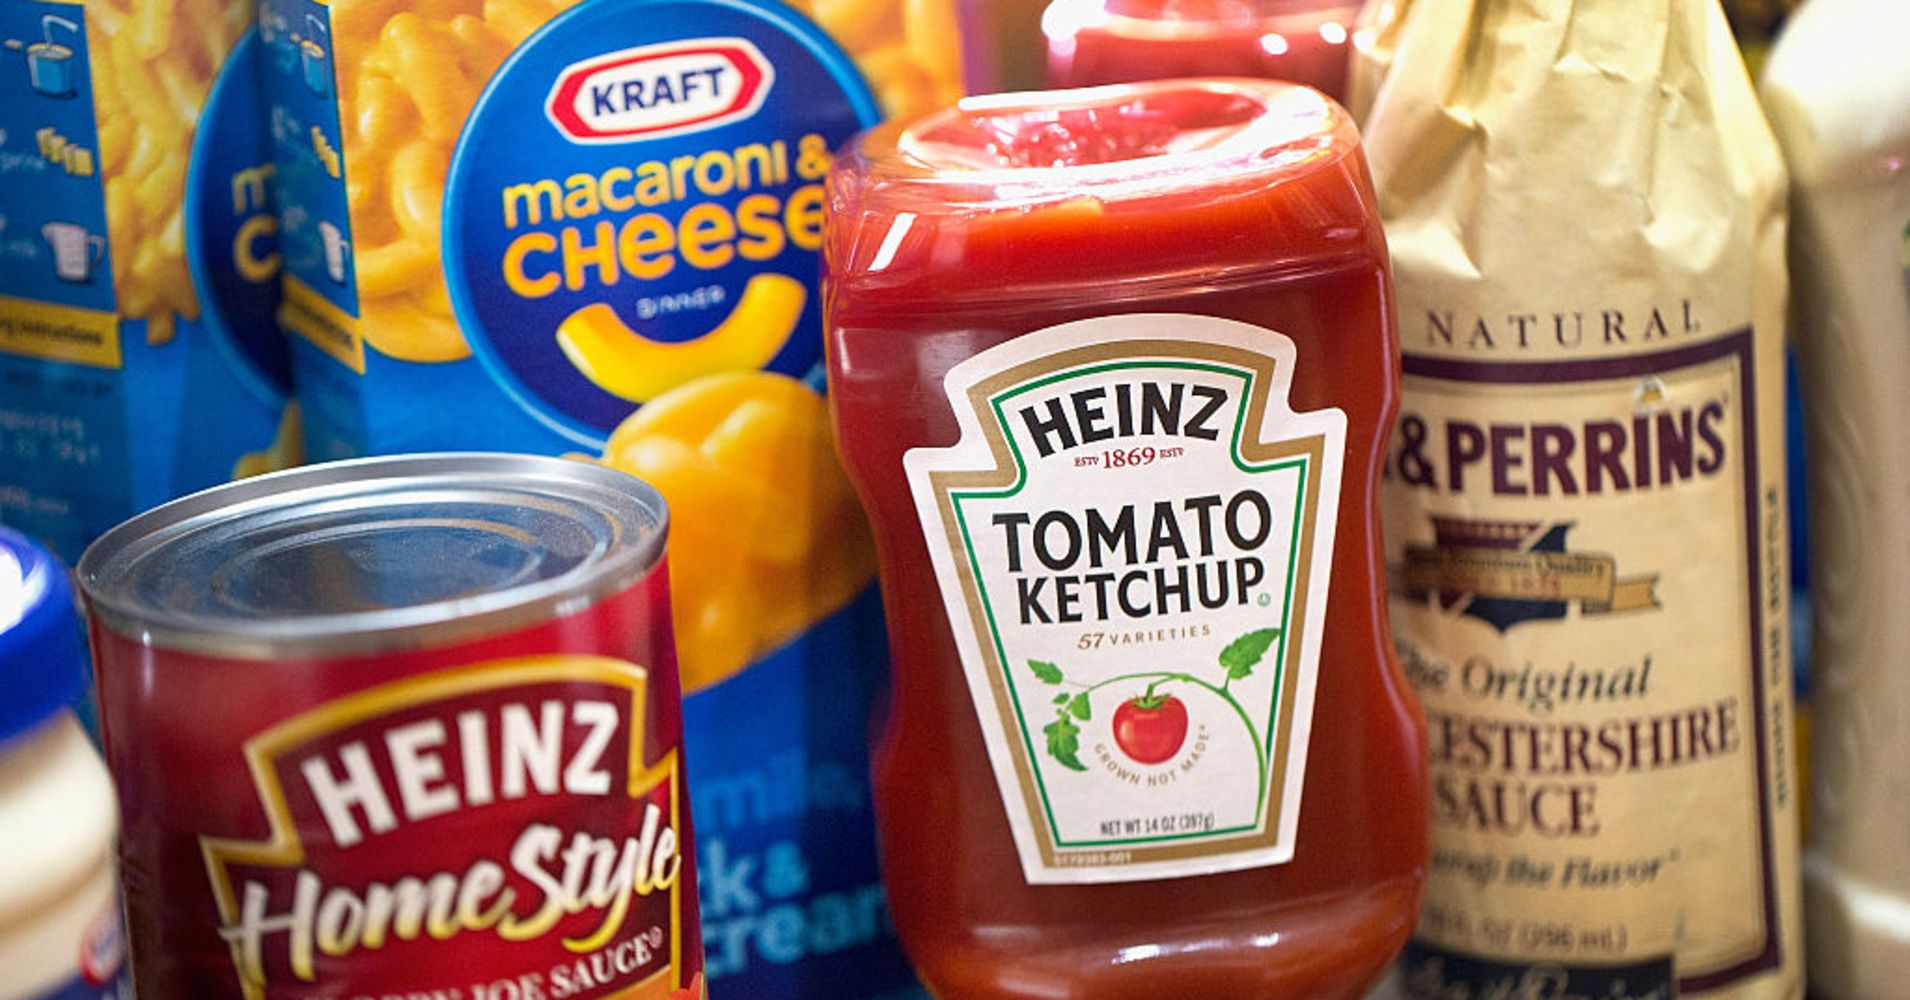 Kraft and Heinz products